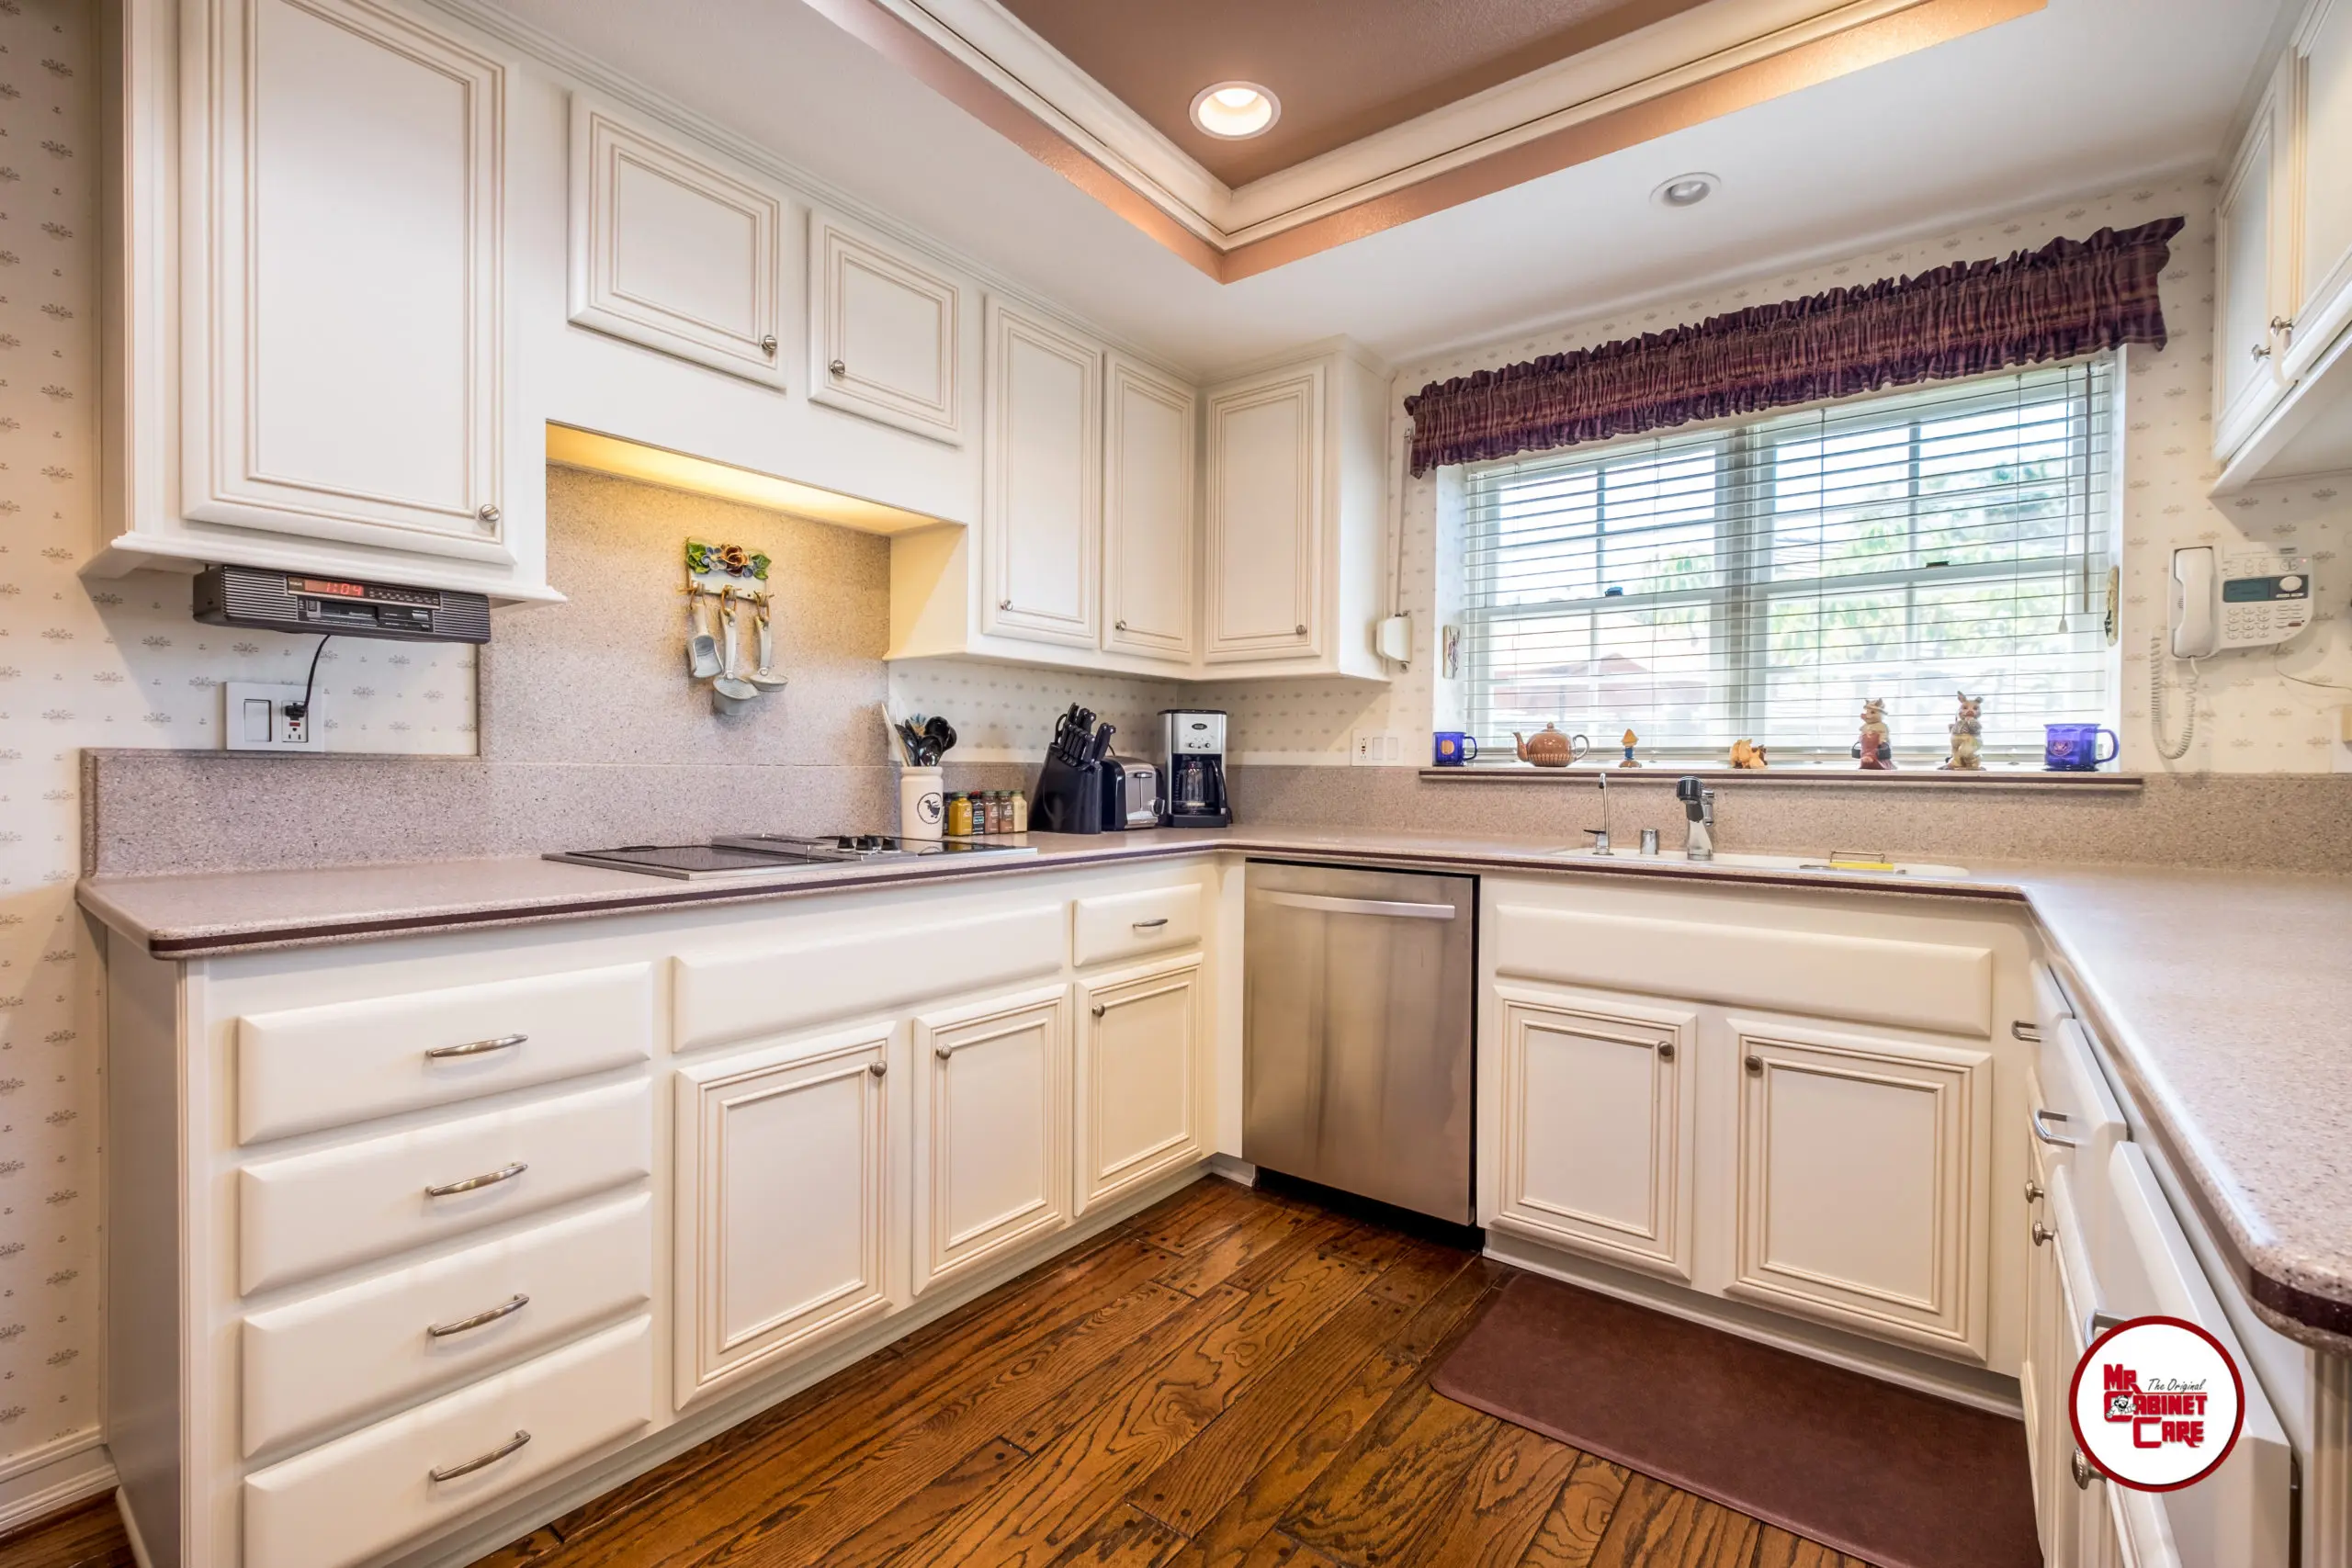 Breaking Down The Costs Of Cabinet Refacing, How Much Should Kitchen Cabinet Refacing Cost